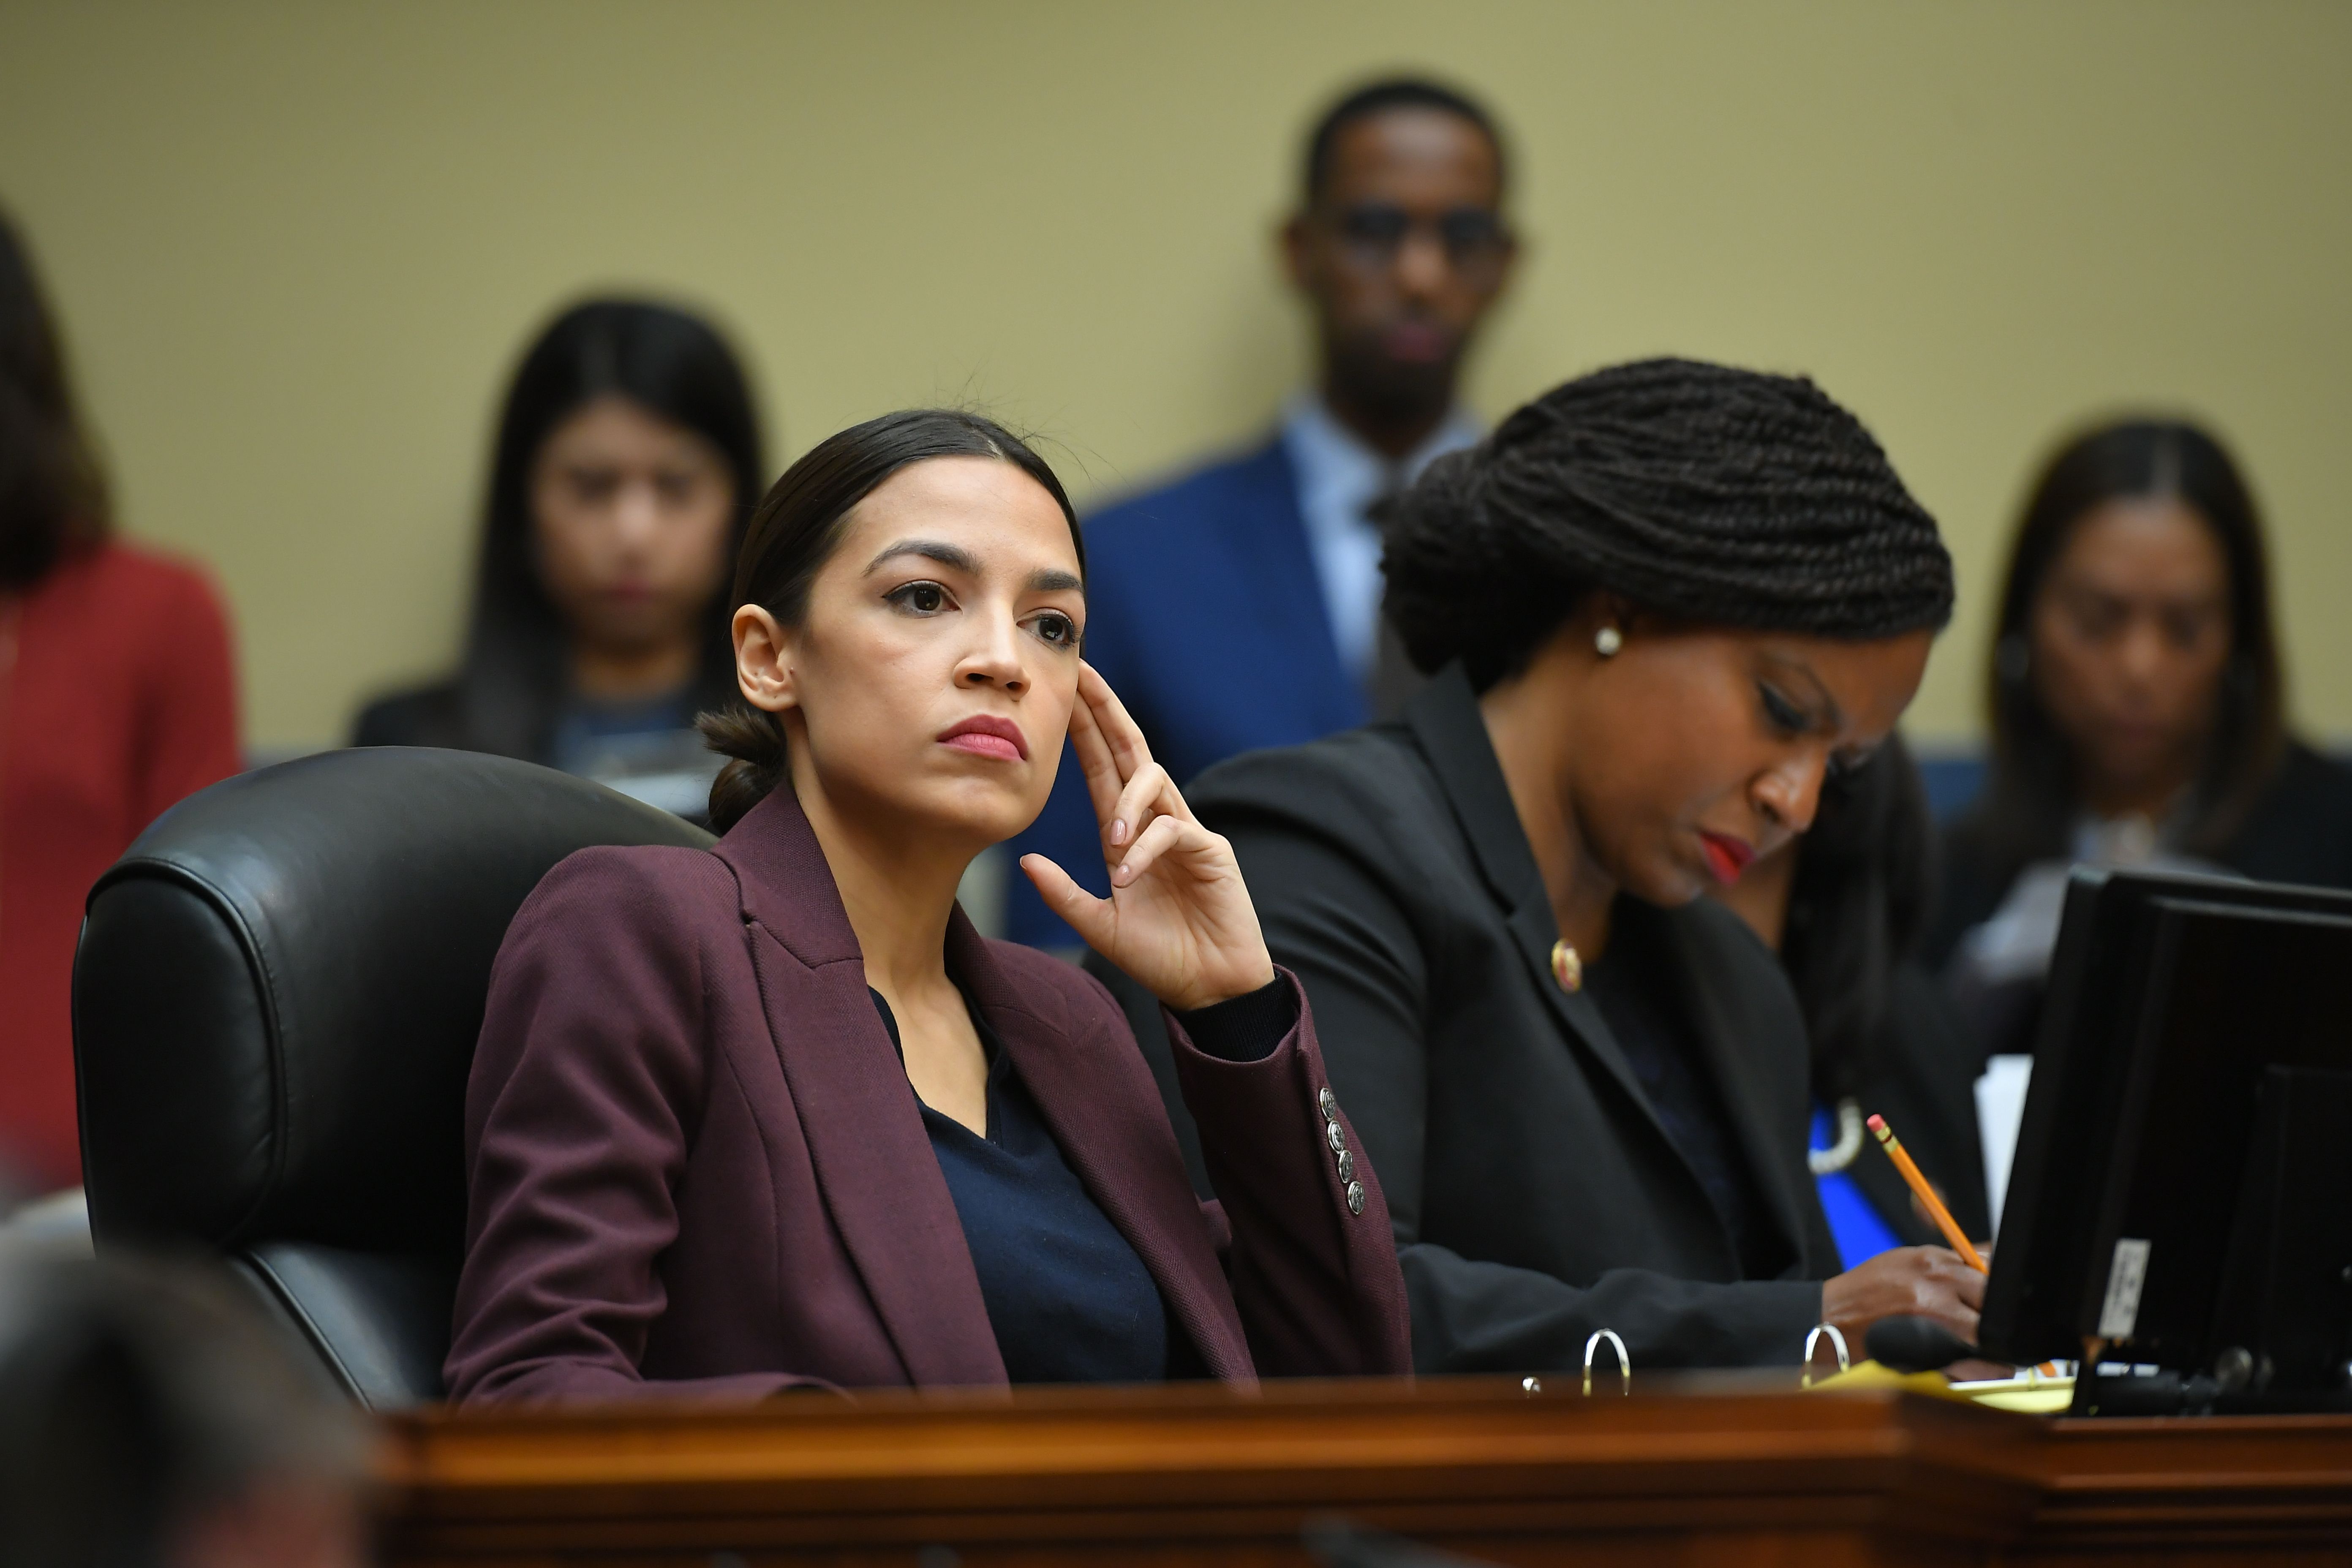 US Congresswoman Alexandria Ocasio-Cortez(D-NY) listens as Michael Cohen, attorney for President Trump, testifies before the House Oversight and Reform Committee in the Rayburn House Office Building on Capitol Hill in Washington, DC on February 27, 2019. (MANDEL NGAN/AFP/Getty Images)